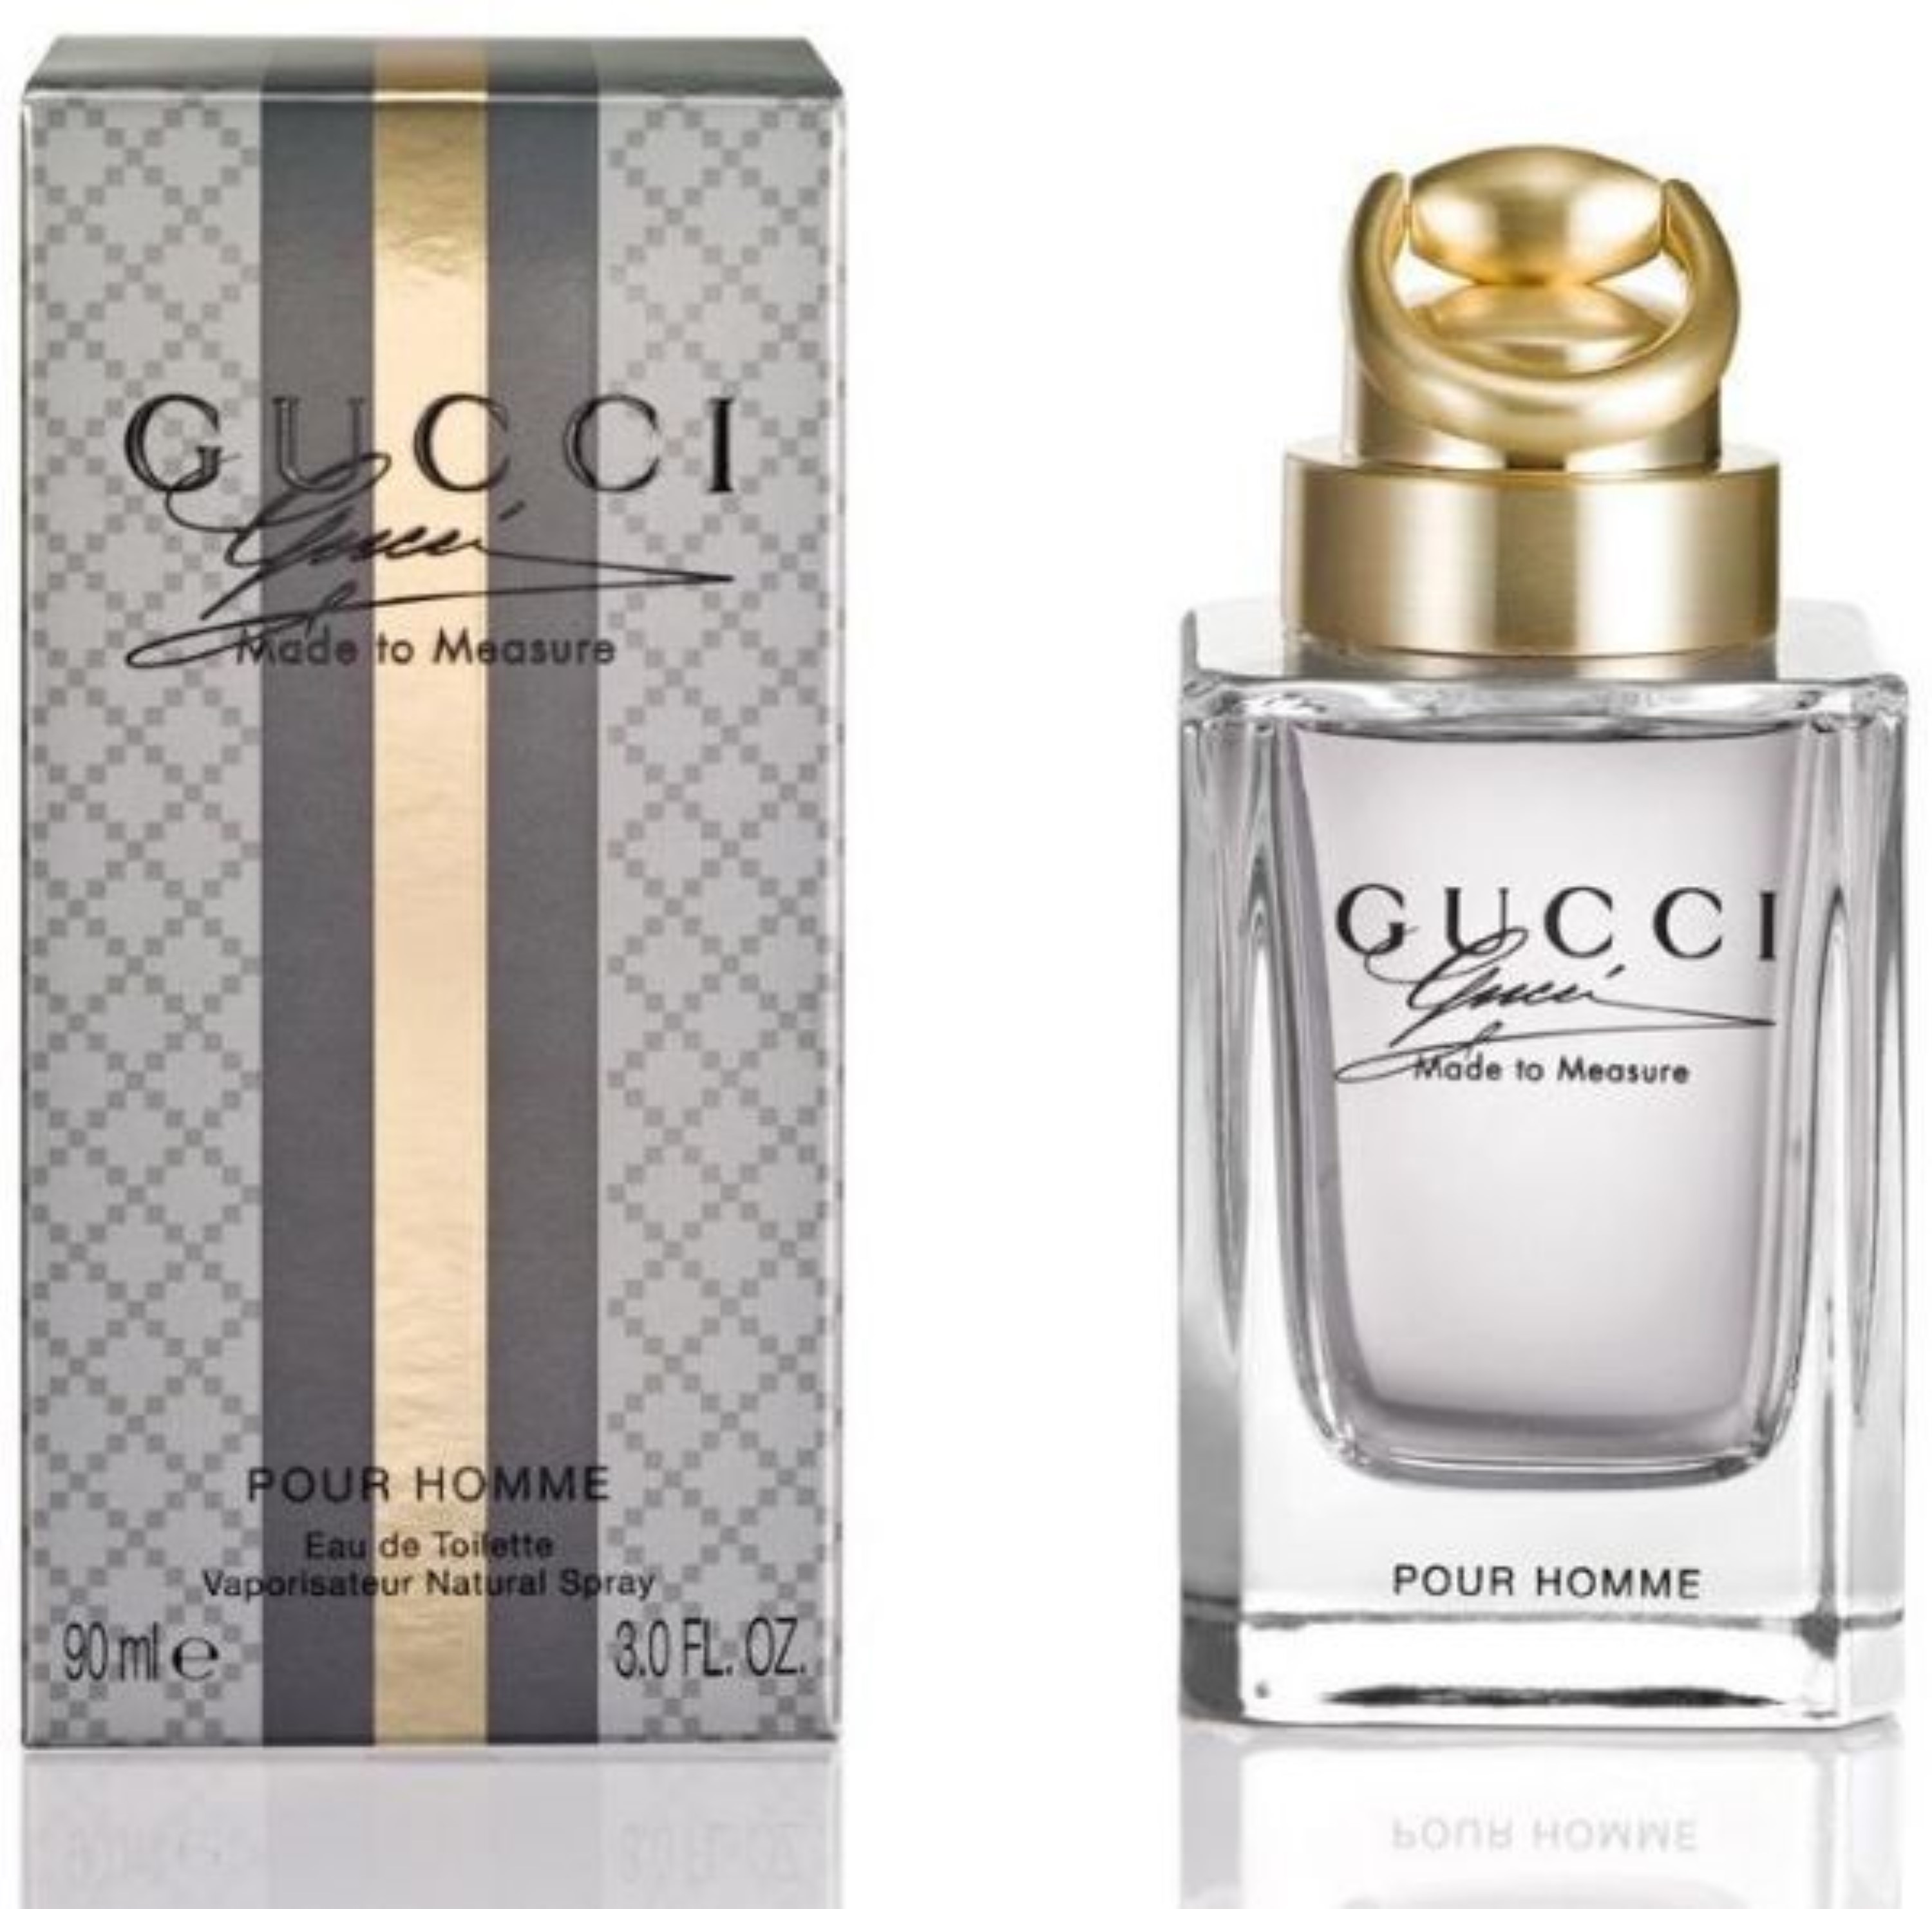 Gucci туалетная вода отзывы. Gucci by Gucci made to measure pour homme. Gucci made to measure 90 ml. Gucci made to measure pour homme 90ml. Gucci made to measure 50ml.